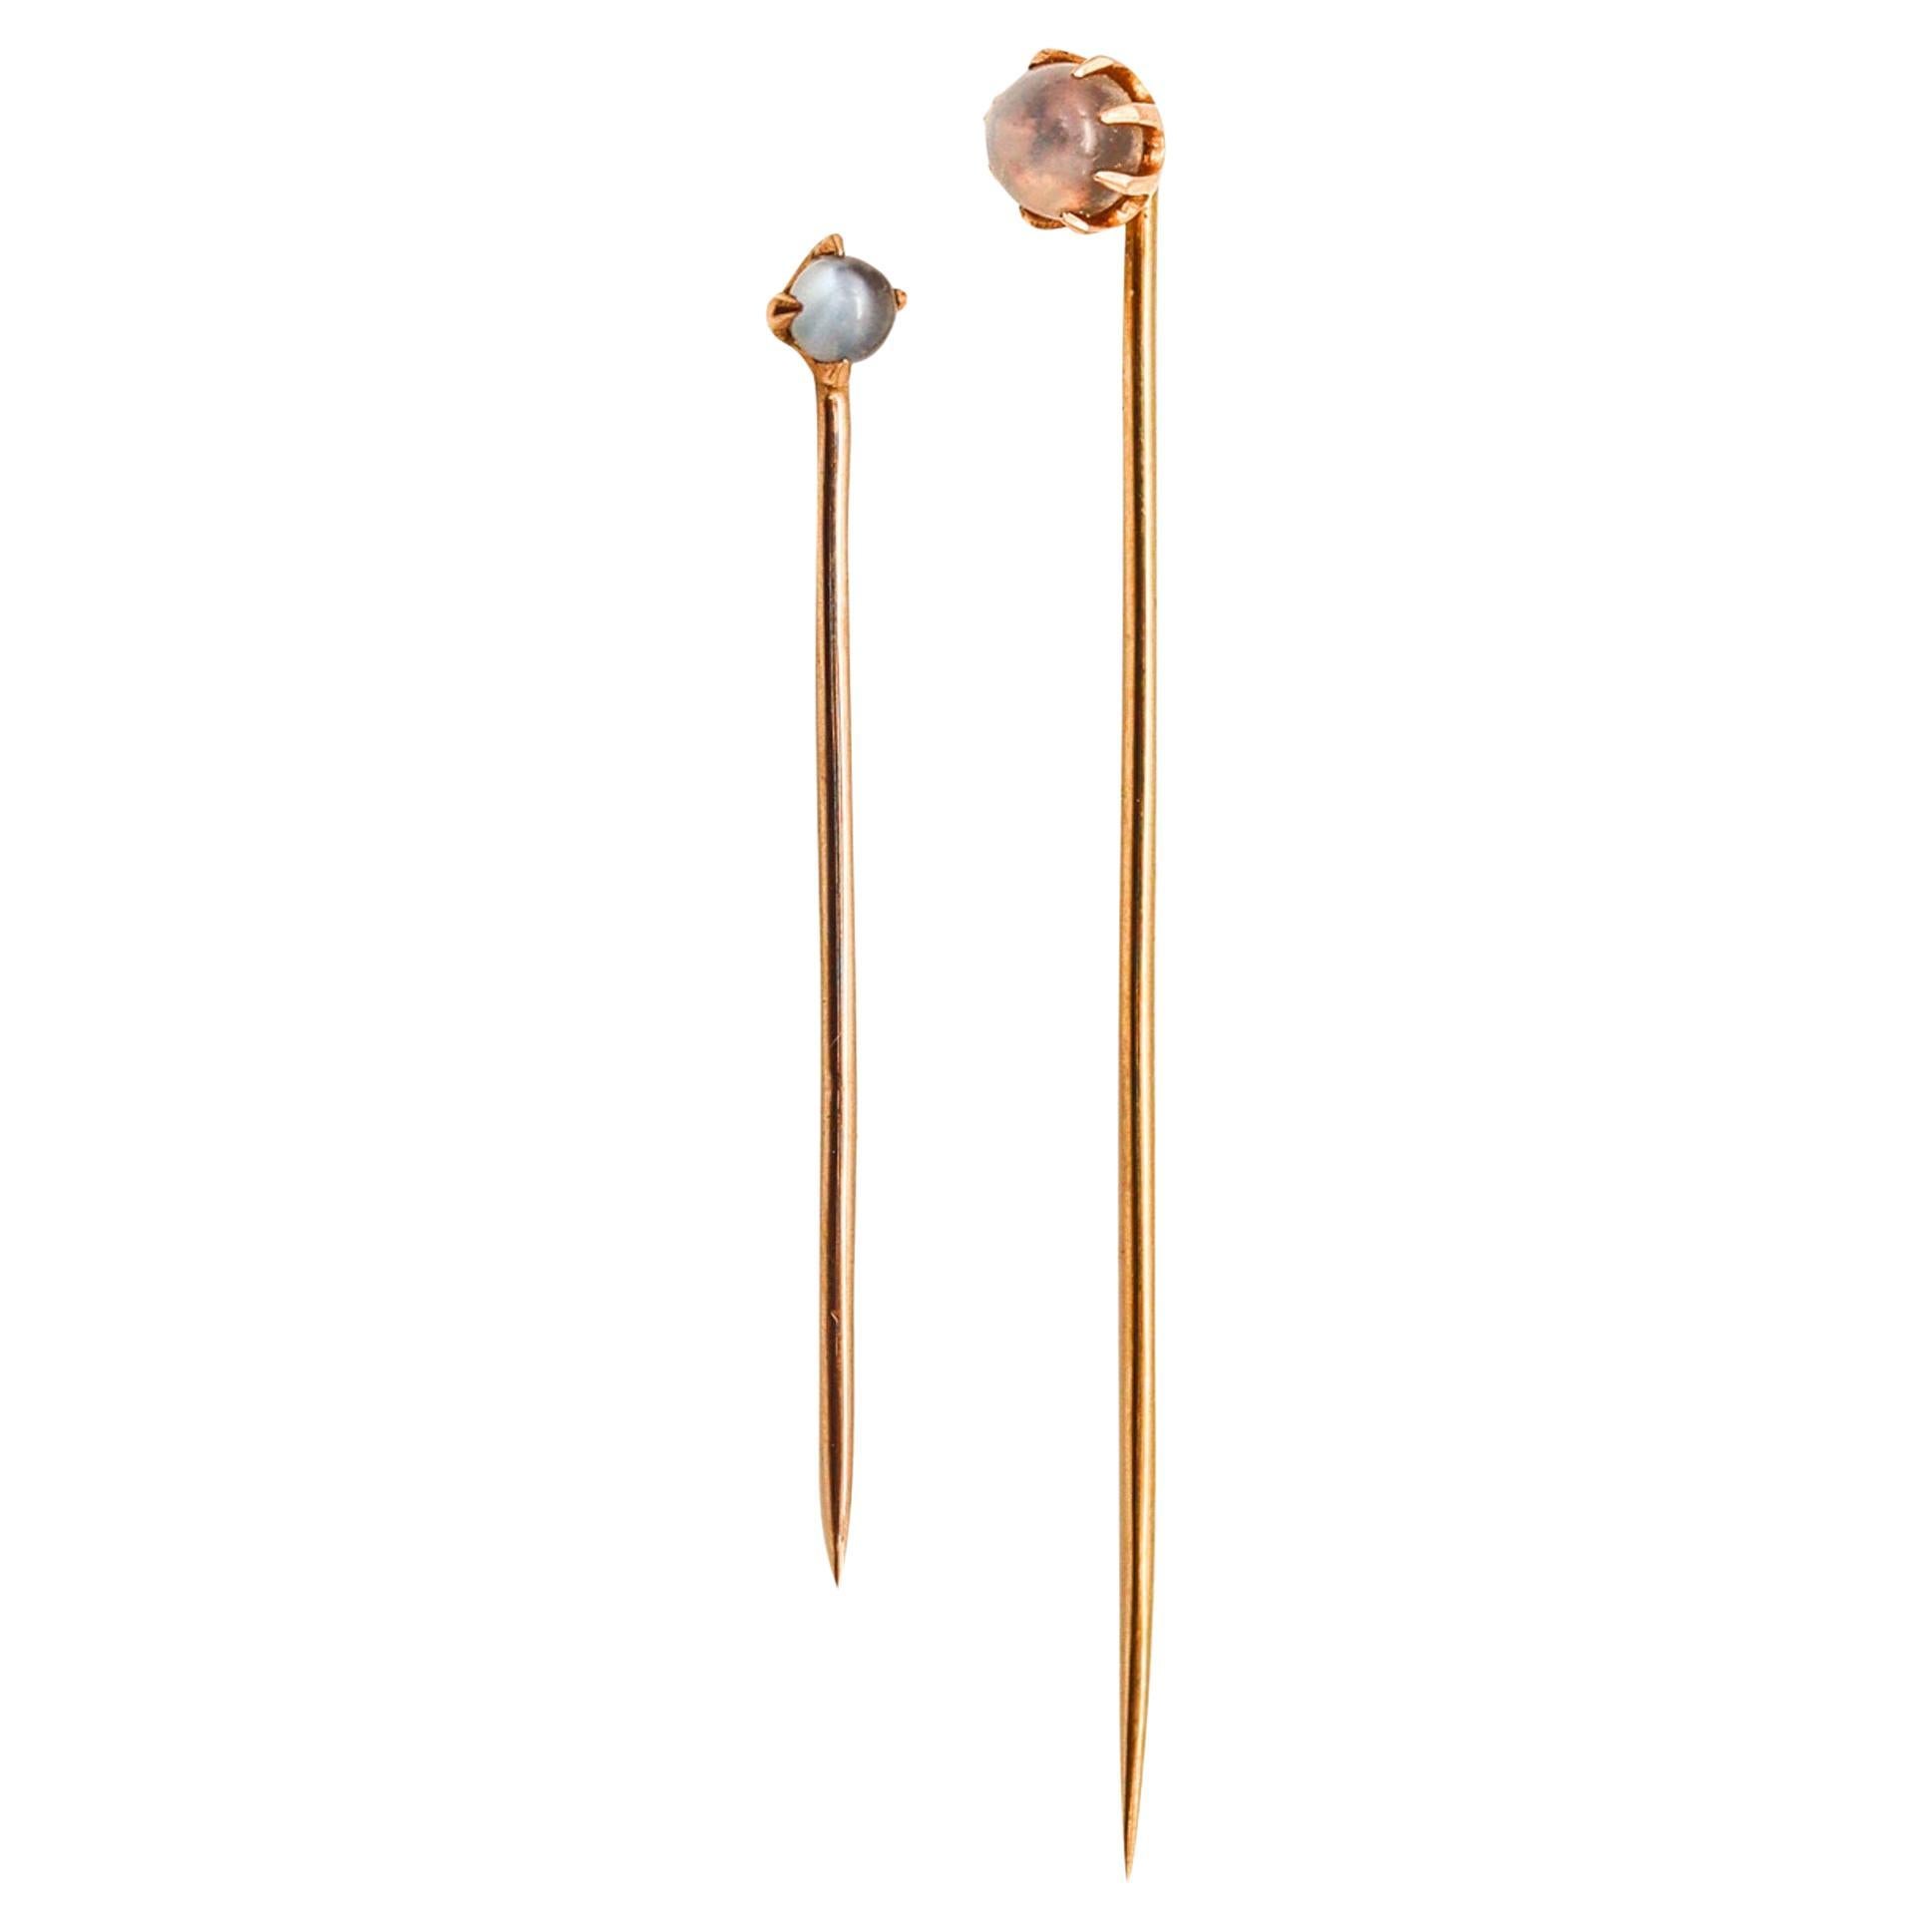 Edwardian 1910 Pair of Stick Pins In 14Kt Yellow Gold with Cat's Eye Moonstones